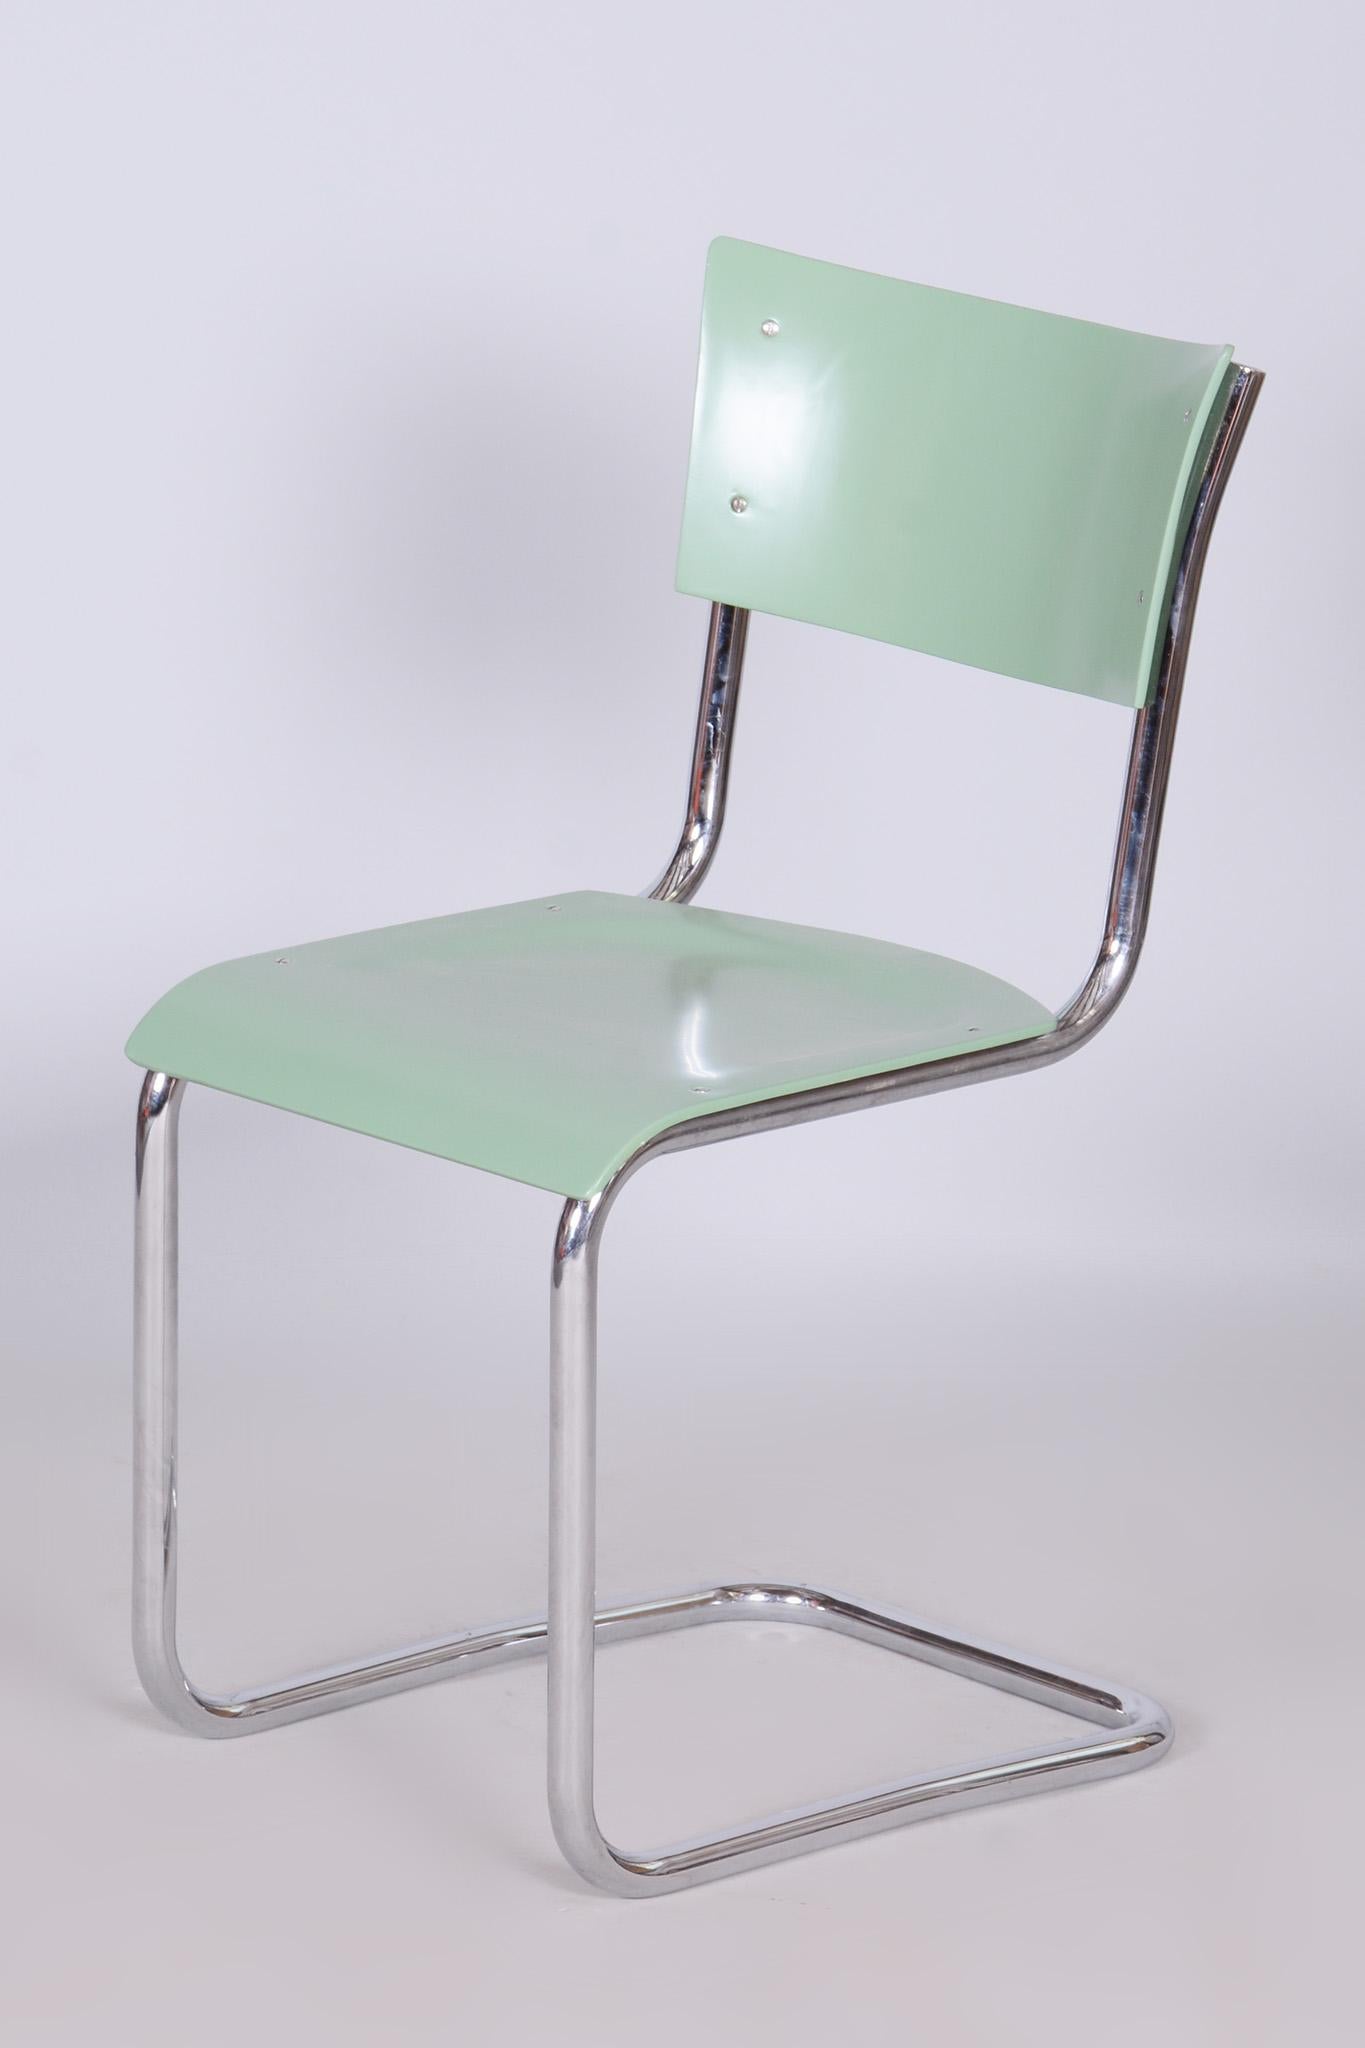 Bauhaus Writing Desk and Chair, Thonet, Chrome-Plated Steel, Czechia, 1930s For Sale 5